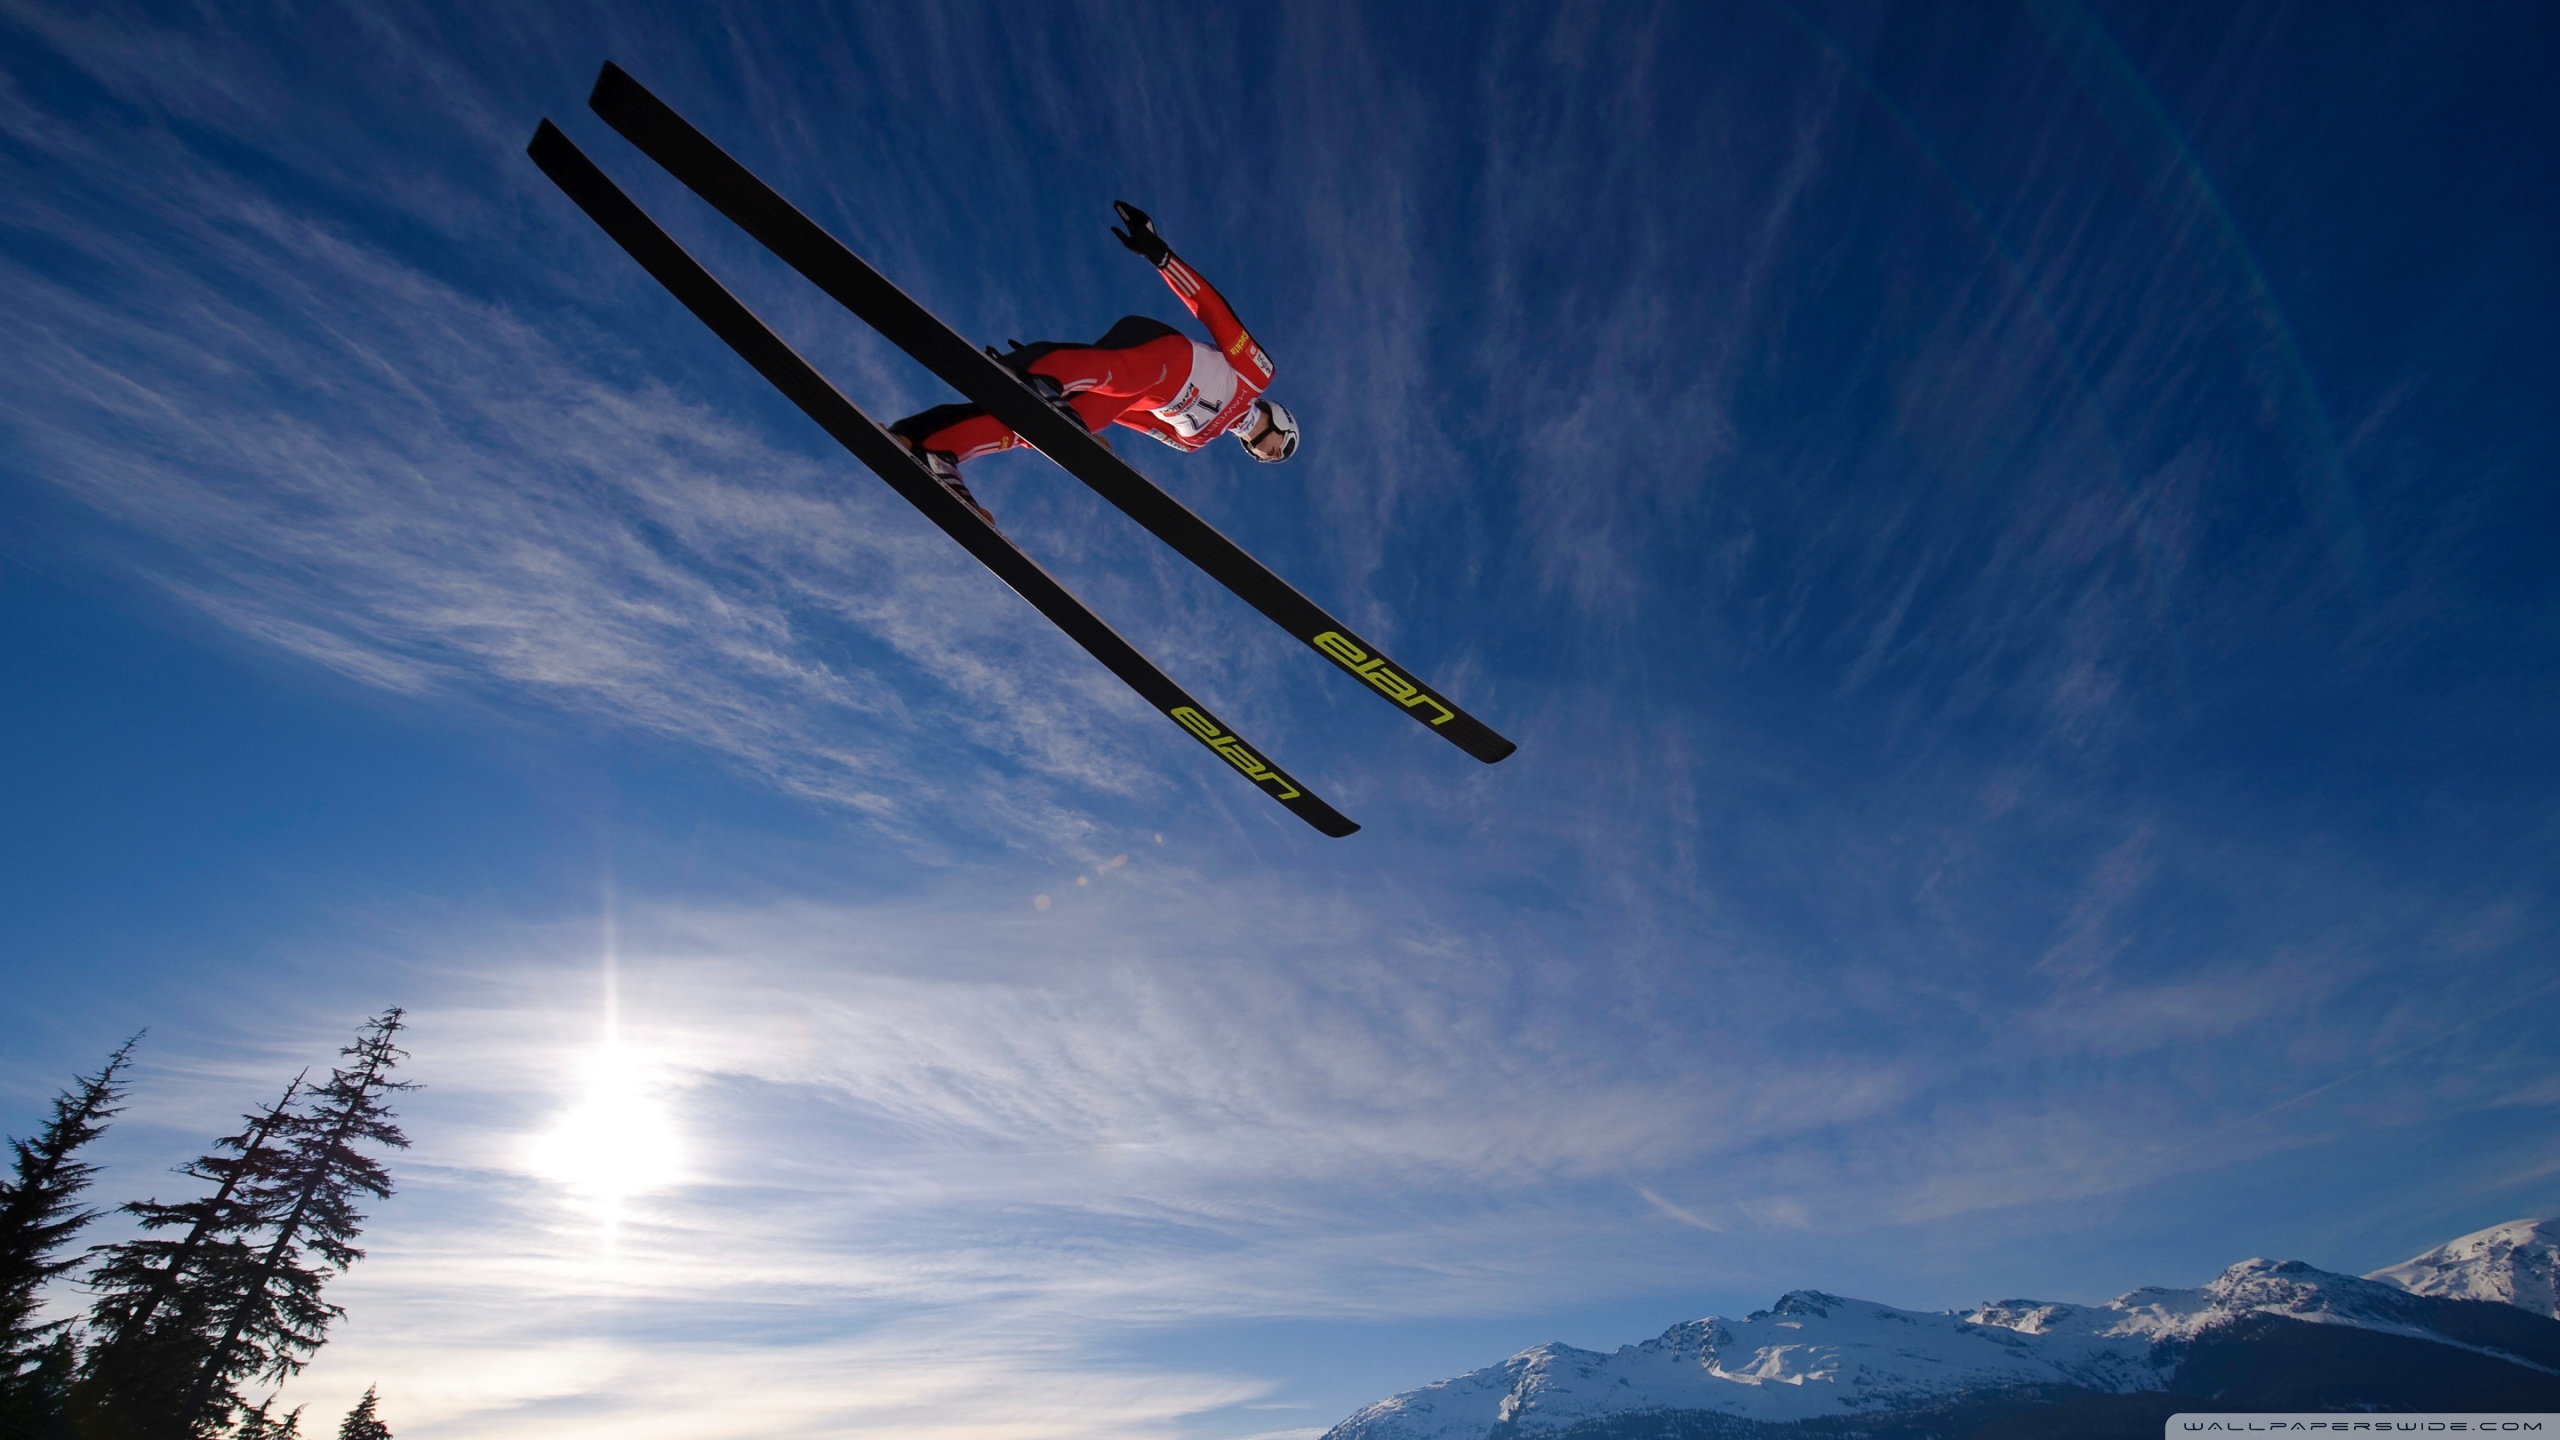 Ski Jumping Wallpaper And Background Image